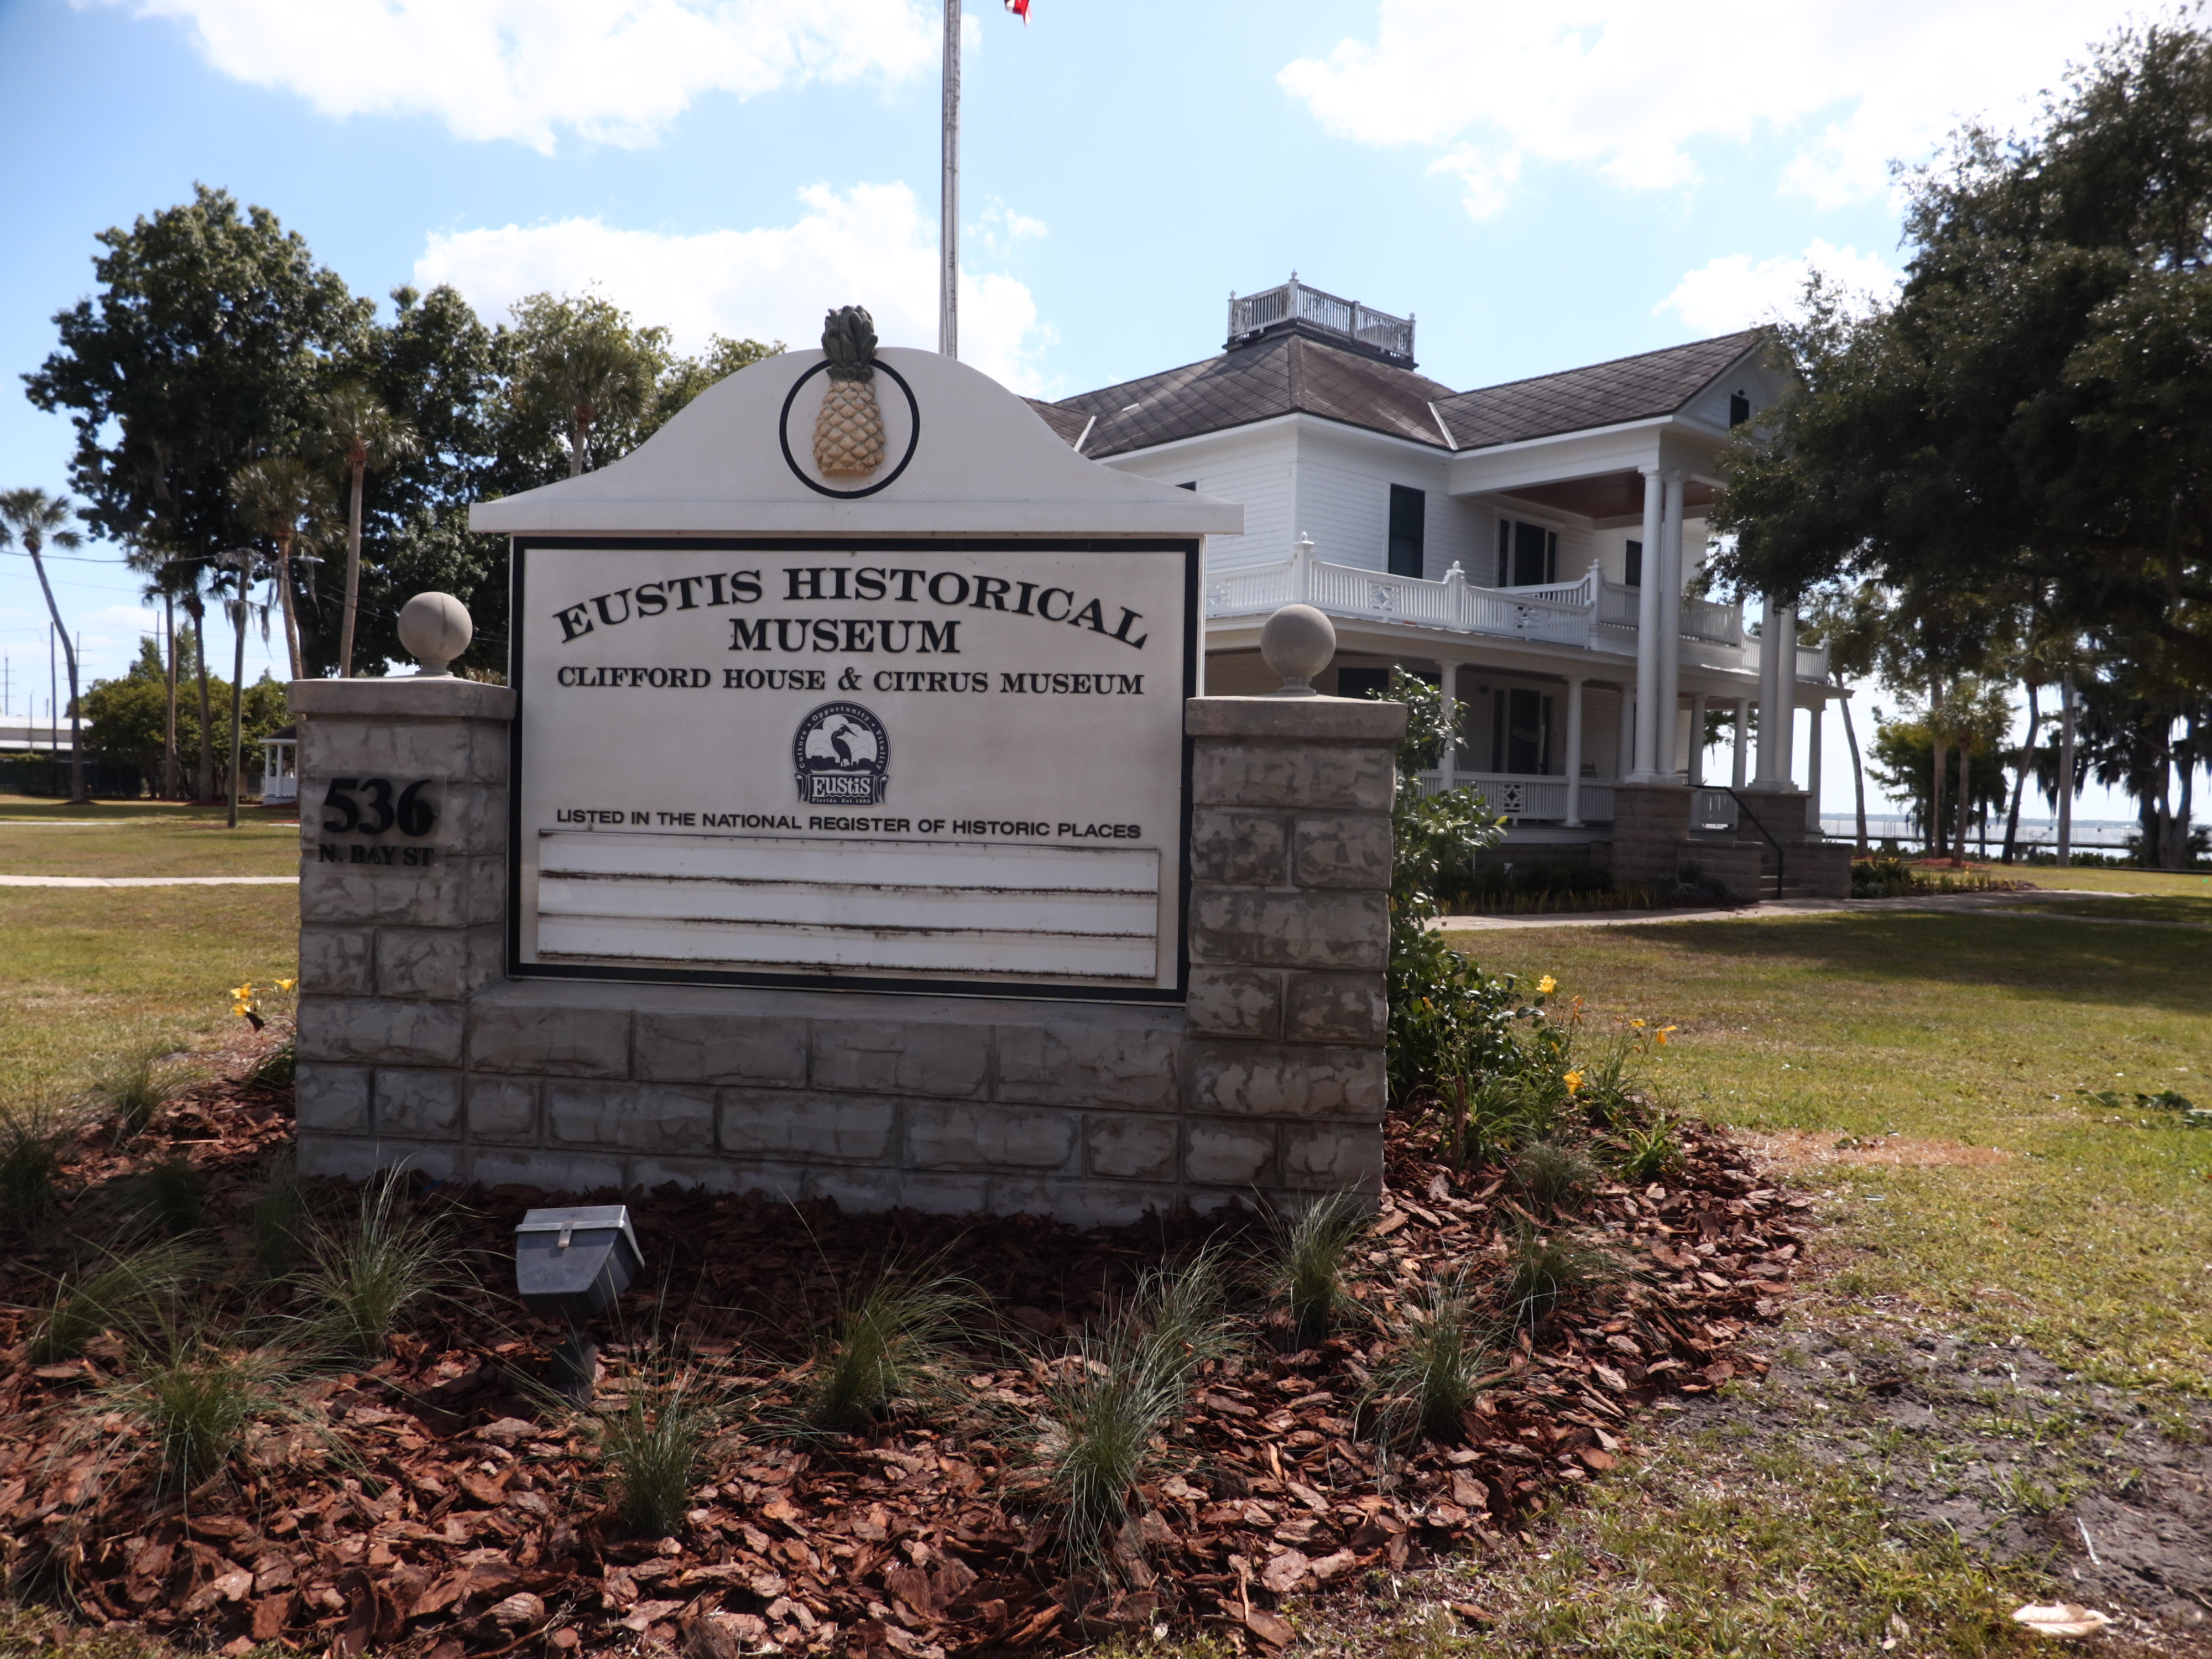 Main Eustis Historic Museum sign with Clifford House in background